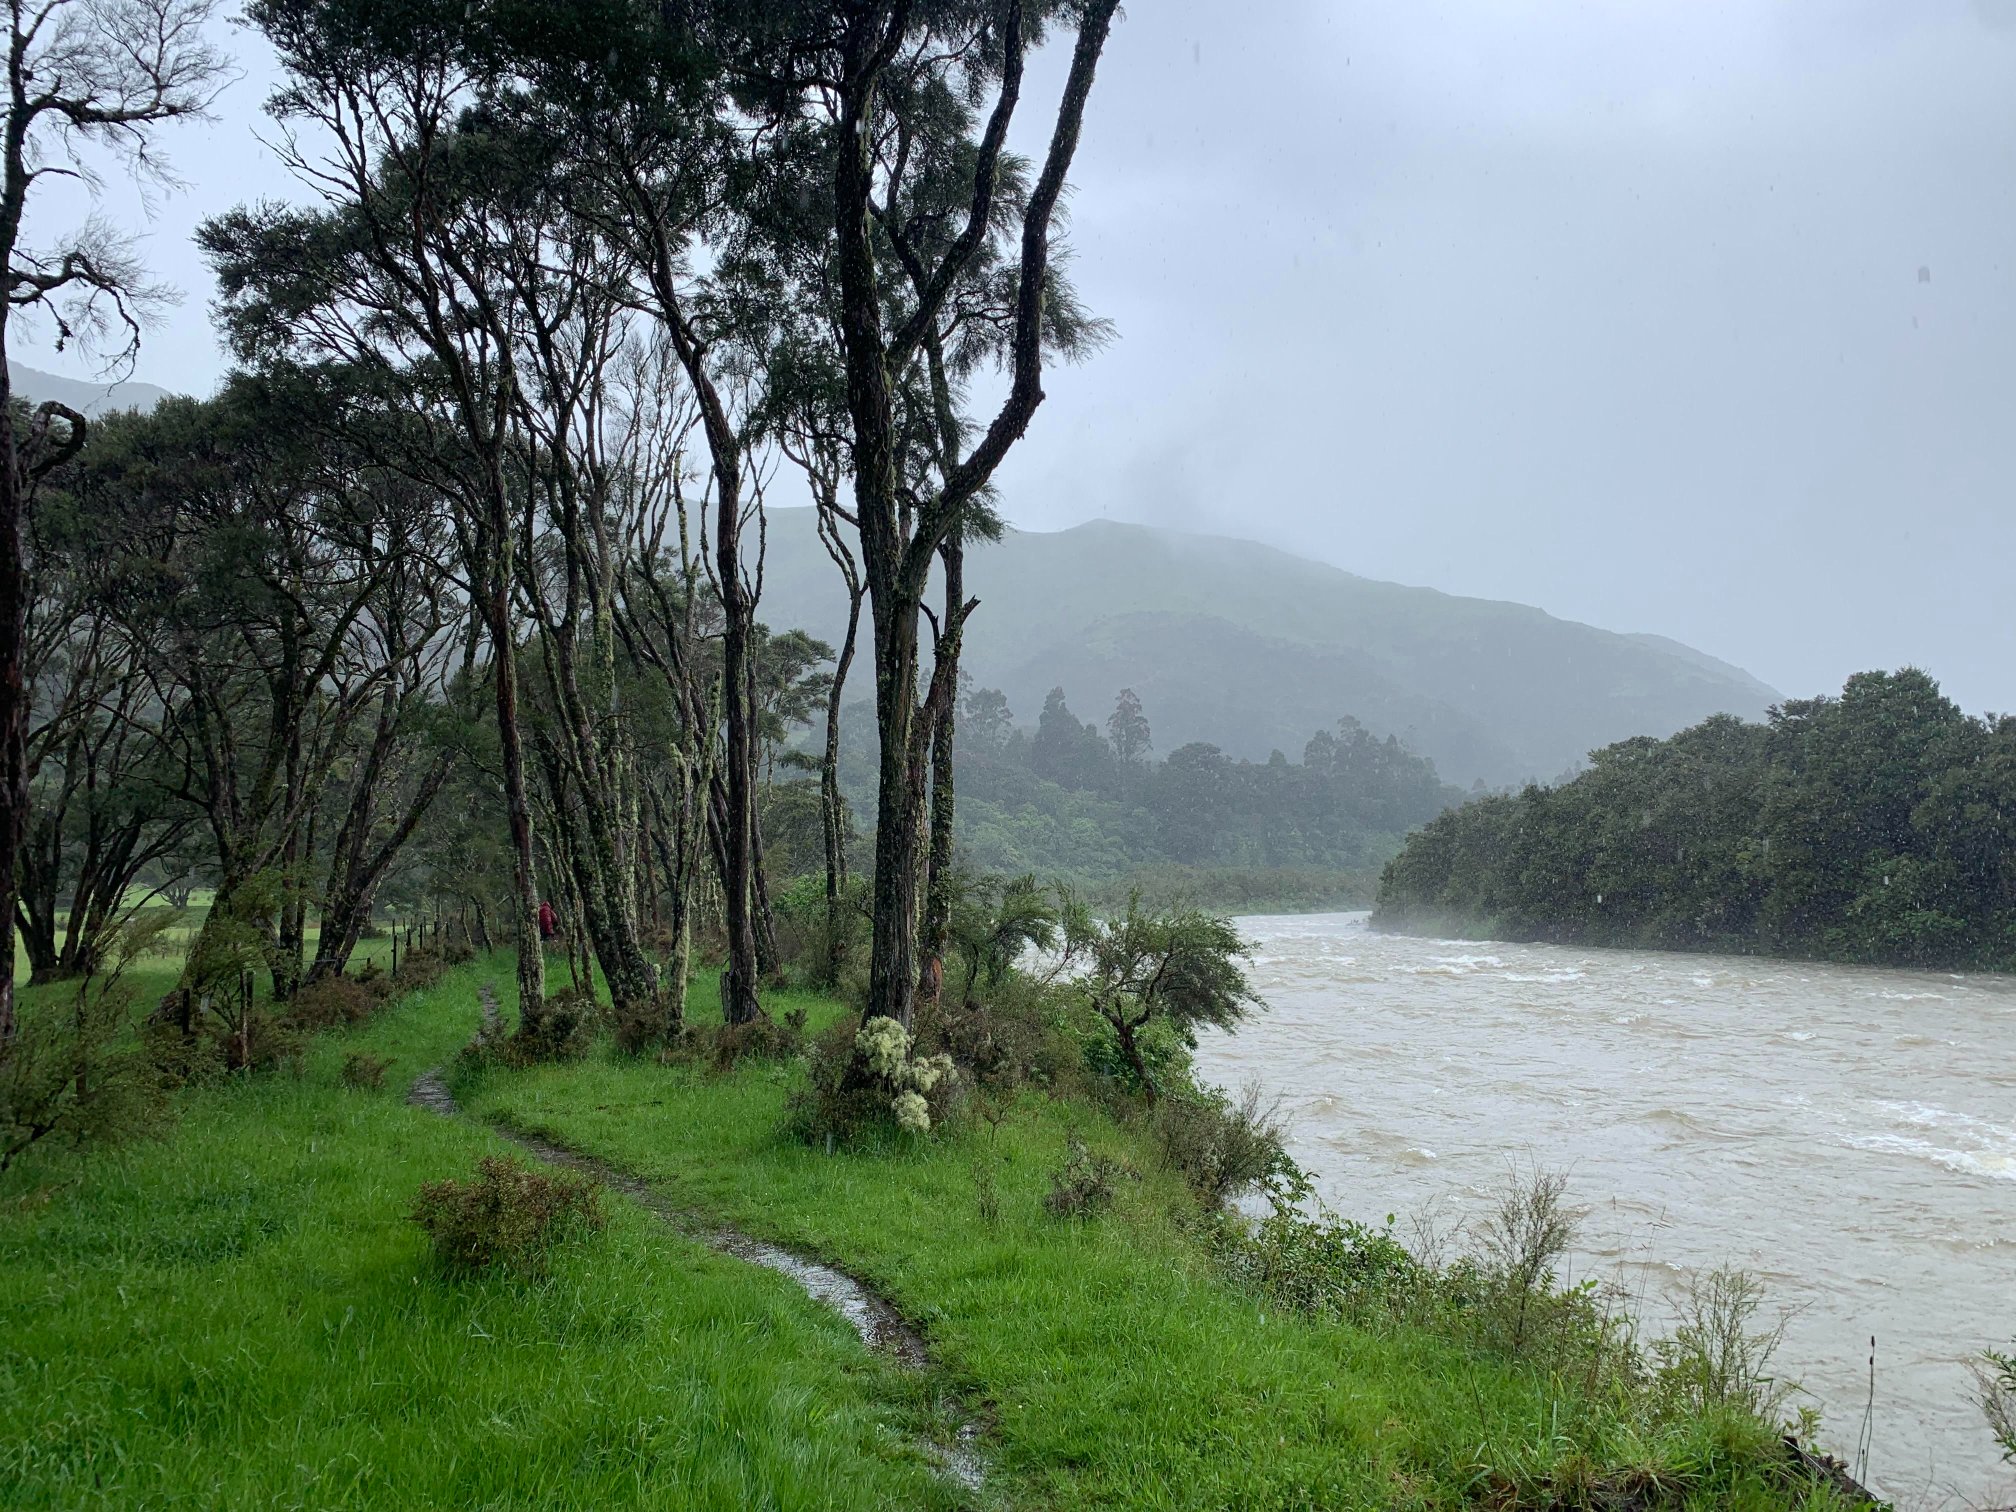 A walking track with pools of water runs alongside a flooded river in the hills